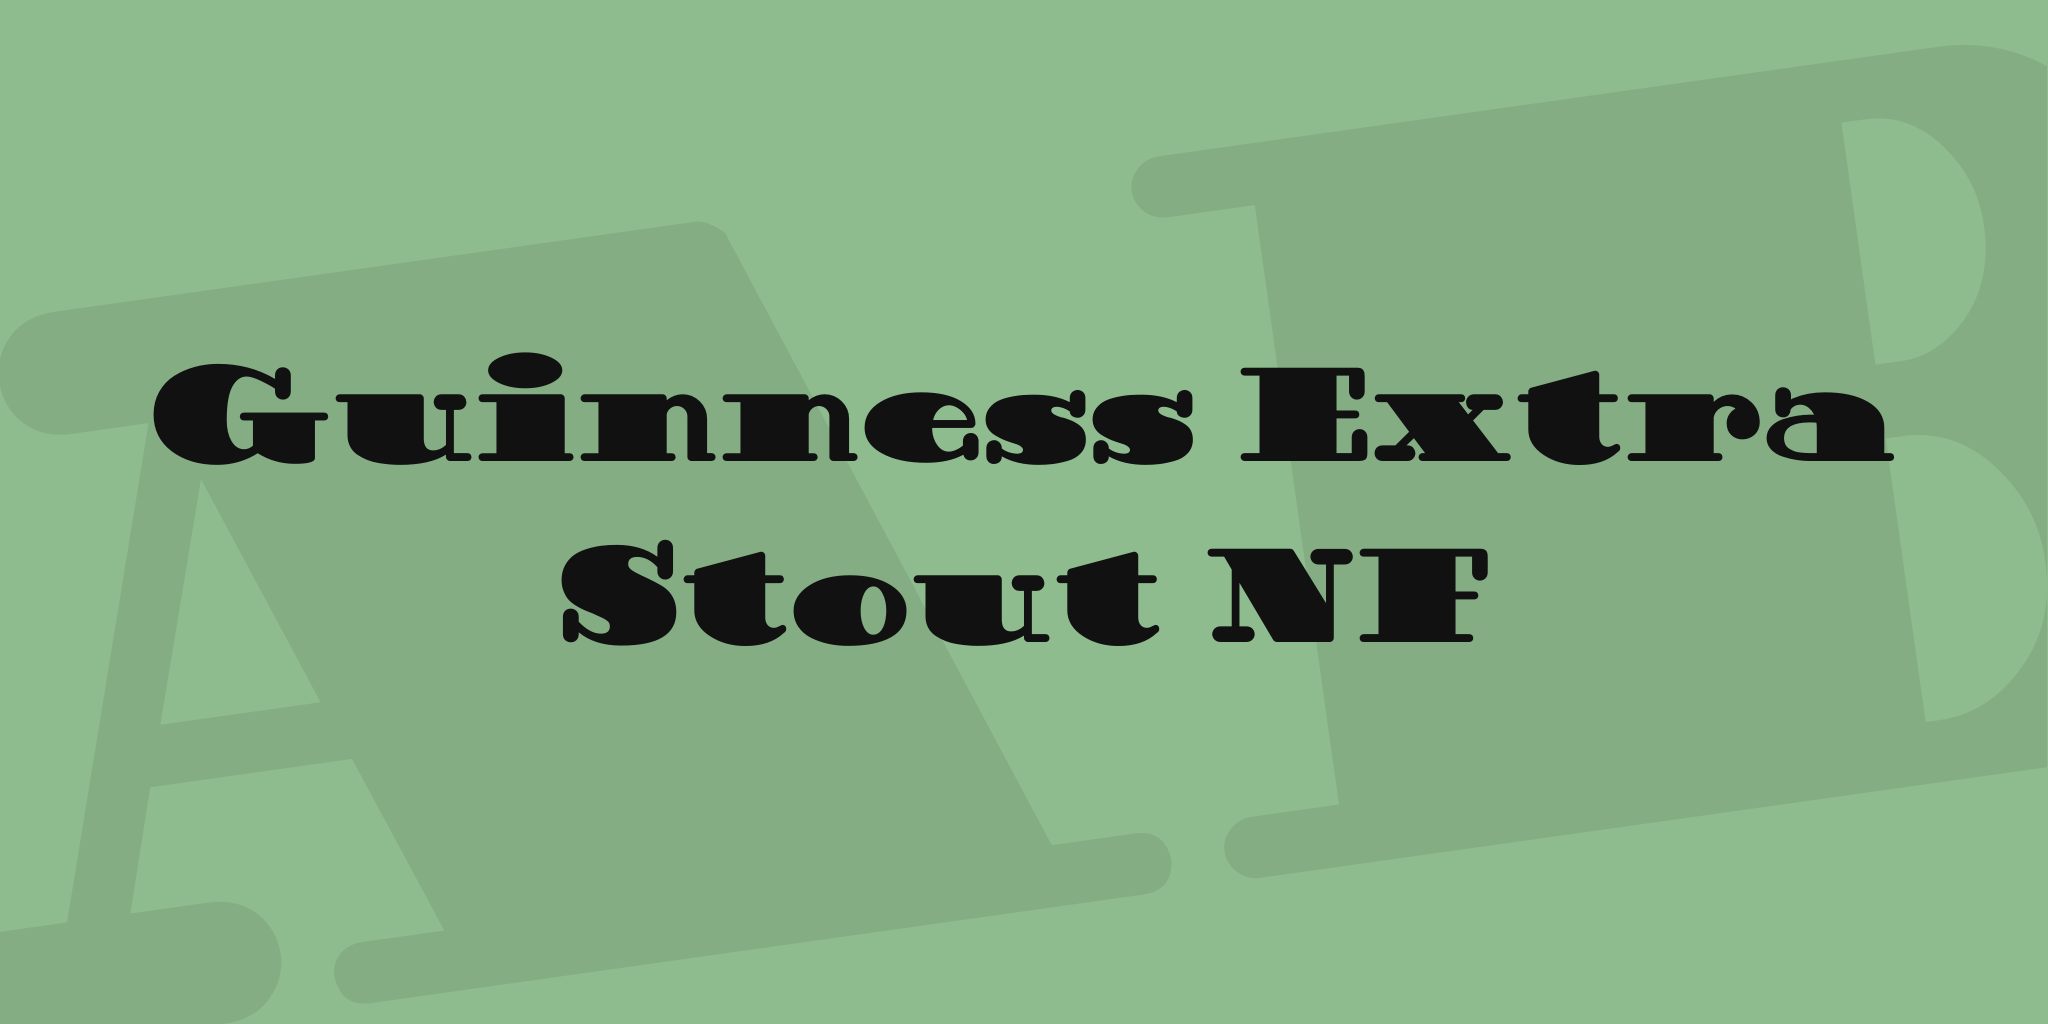 Guinness Extra Stout Nf